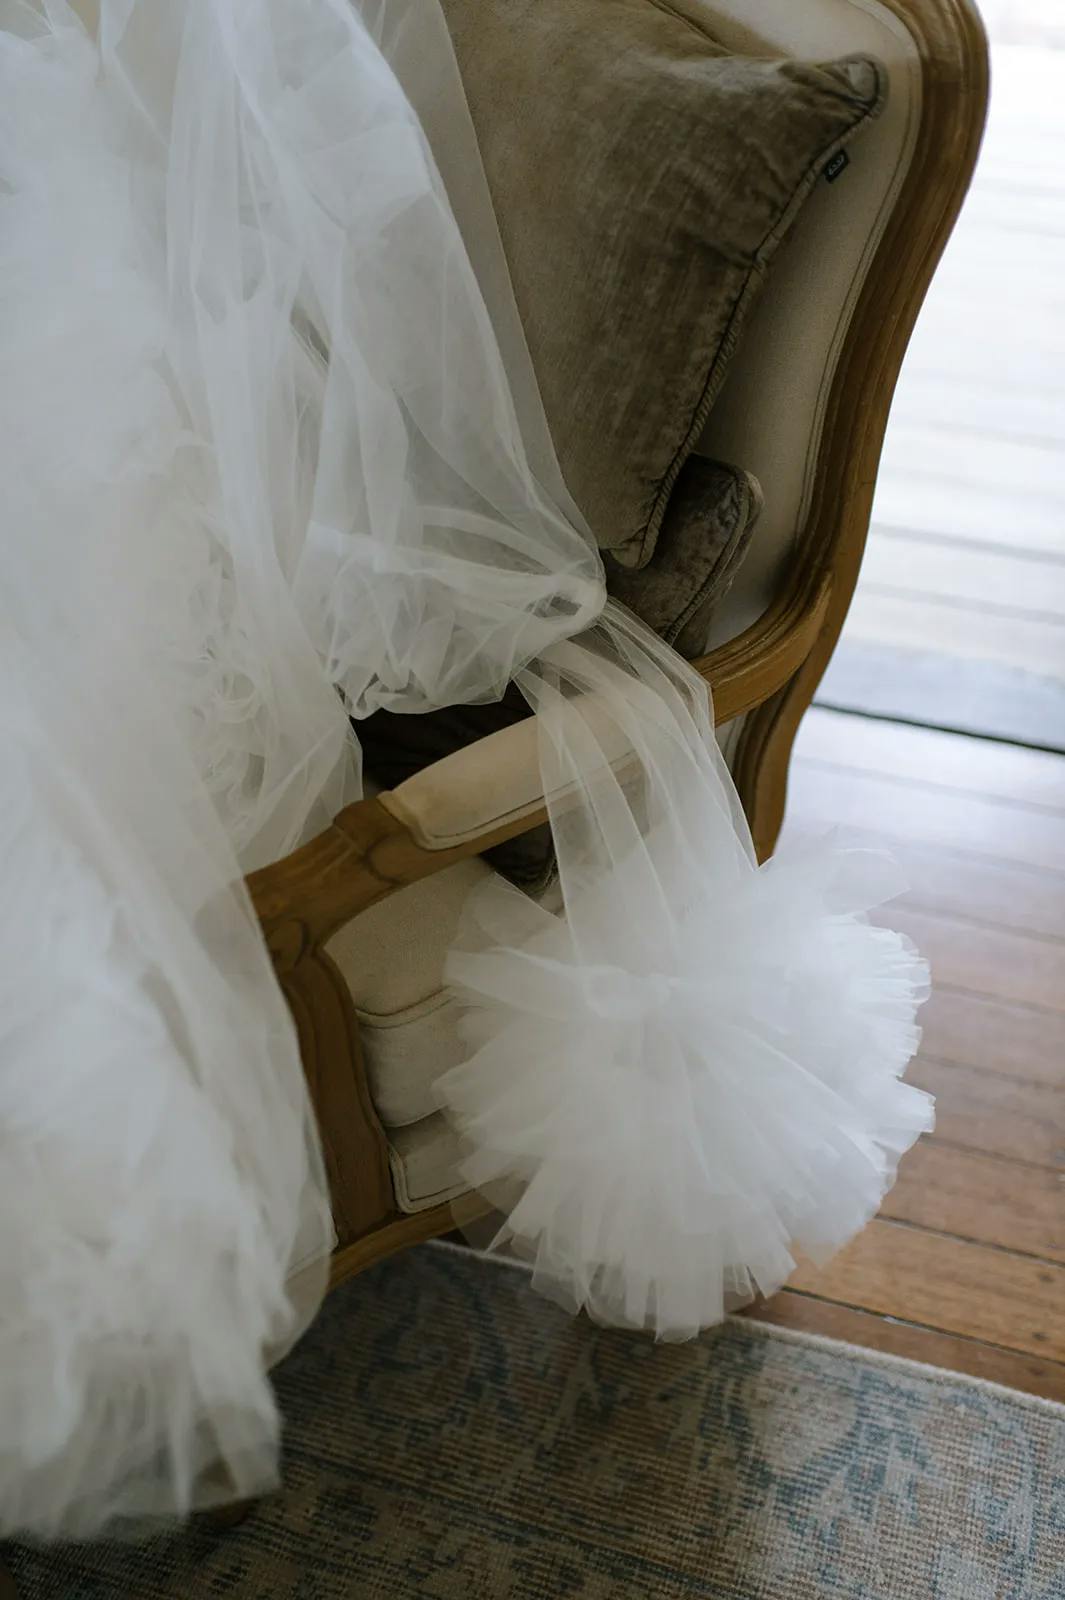 A close-up of a luxurious, vintage-style armchair with beige cushions and wooden frame. A white tulle veil or gown is draped over the chair, with a small pouf of tulle hanging off the arm, adding a soft, elegant touch to the scene. The floor is wooden.